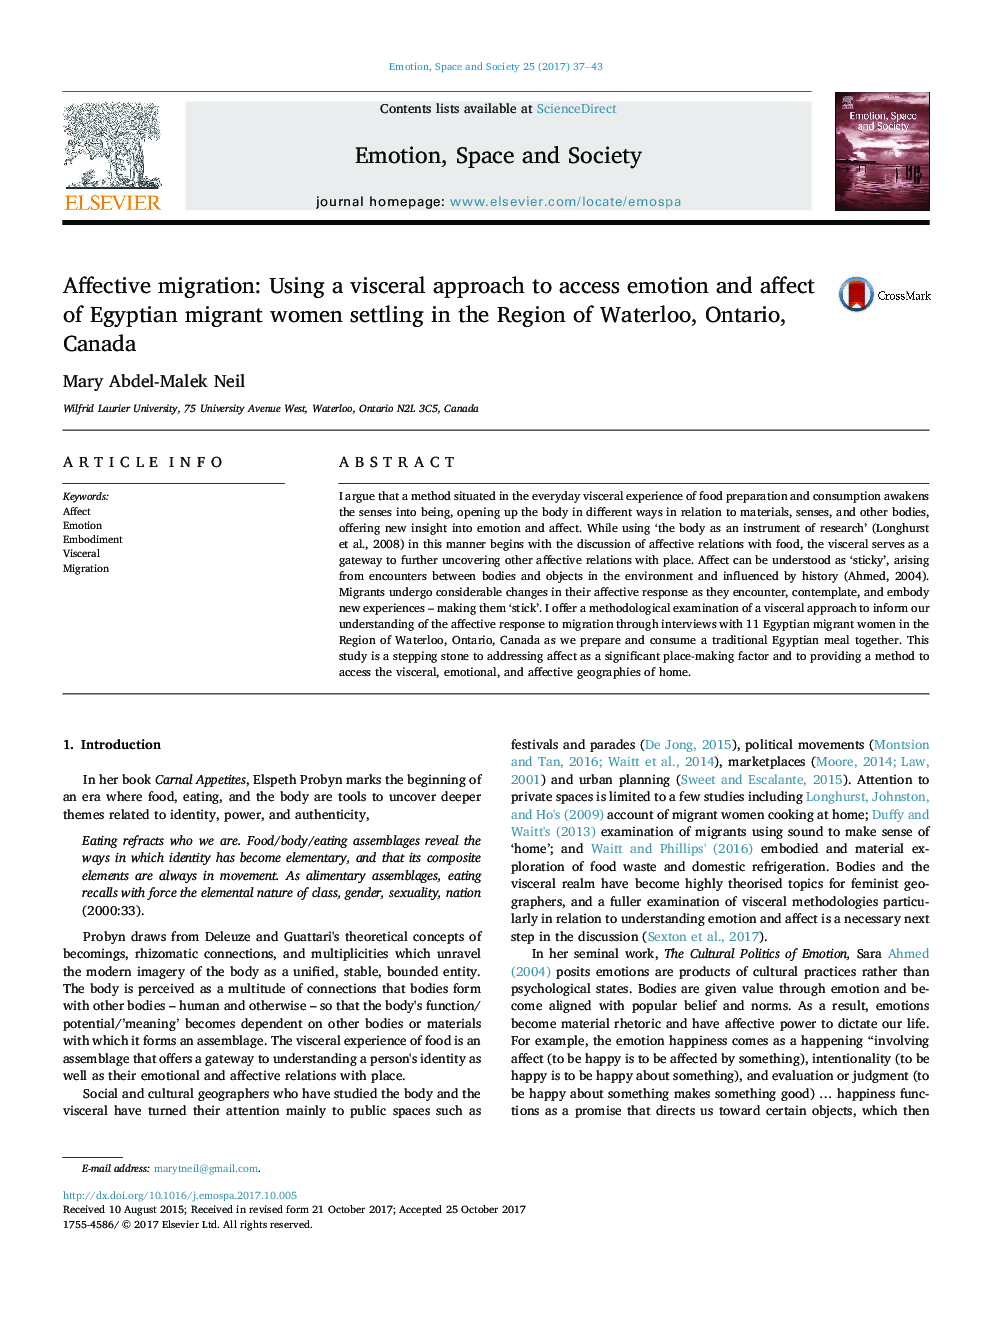 Affective migration: Using a visceral approach to access emotion and affect of Egyptian migrant women settling in the Region of Waterloo, Ontario, Canada